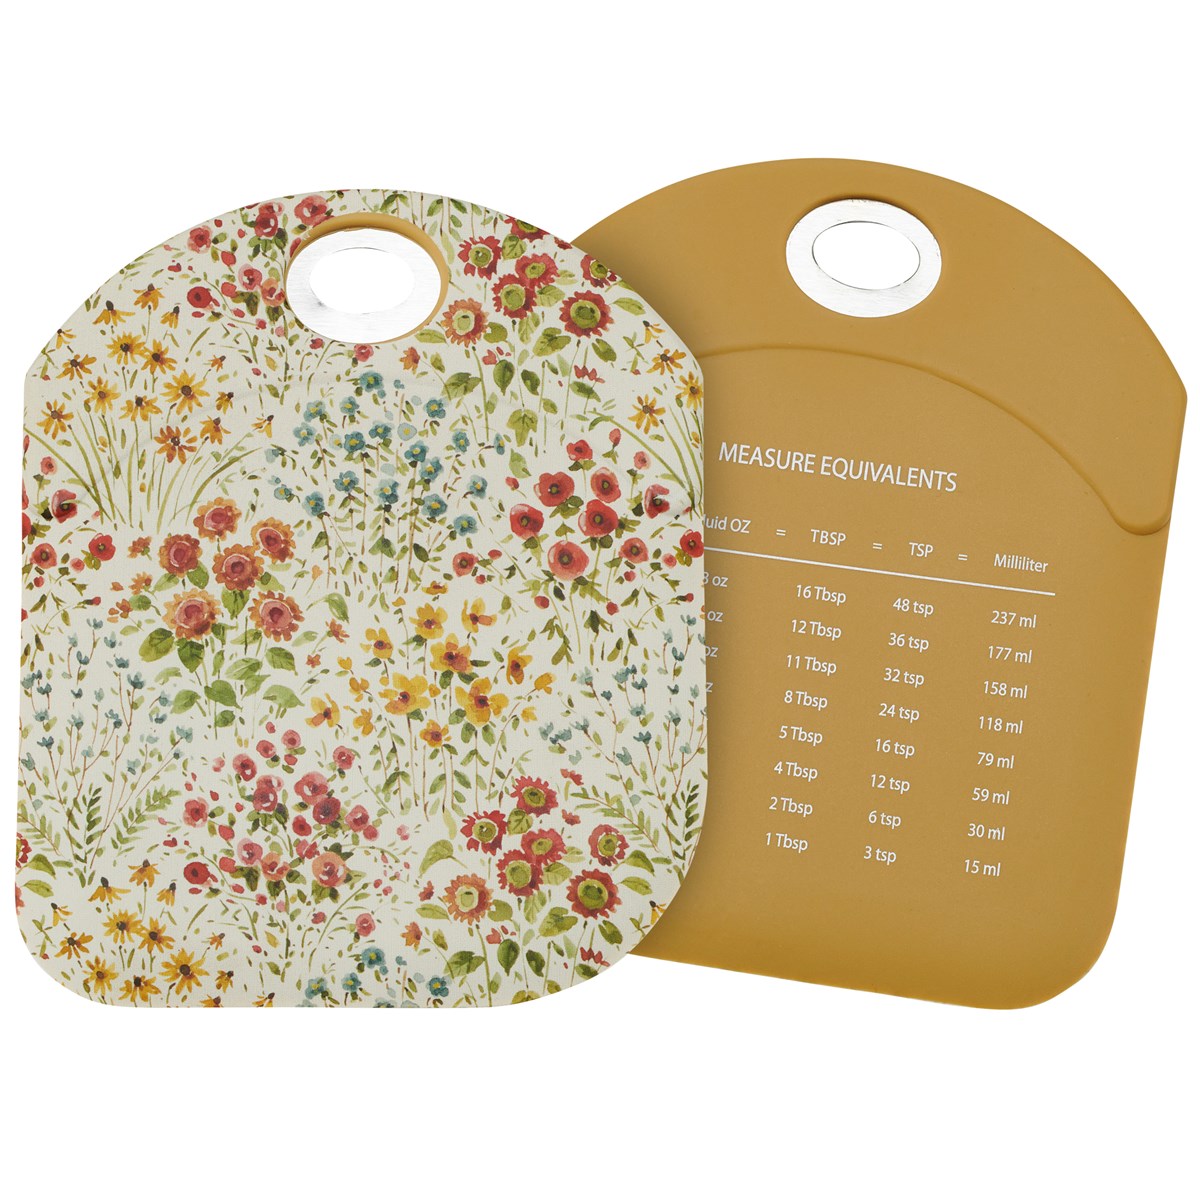 Fall Wildflowers Bowl Scraper - Silicone, Stainless Steel